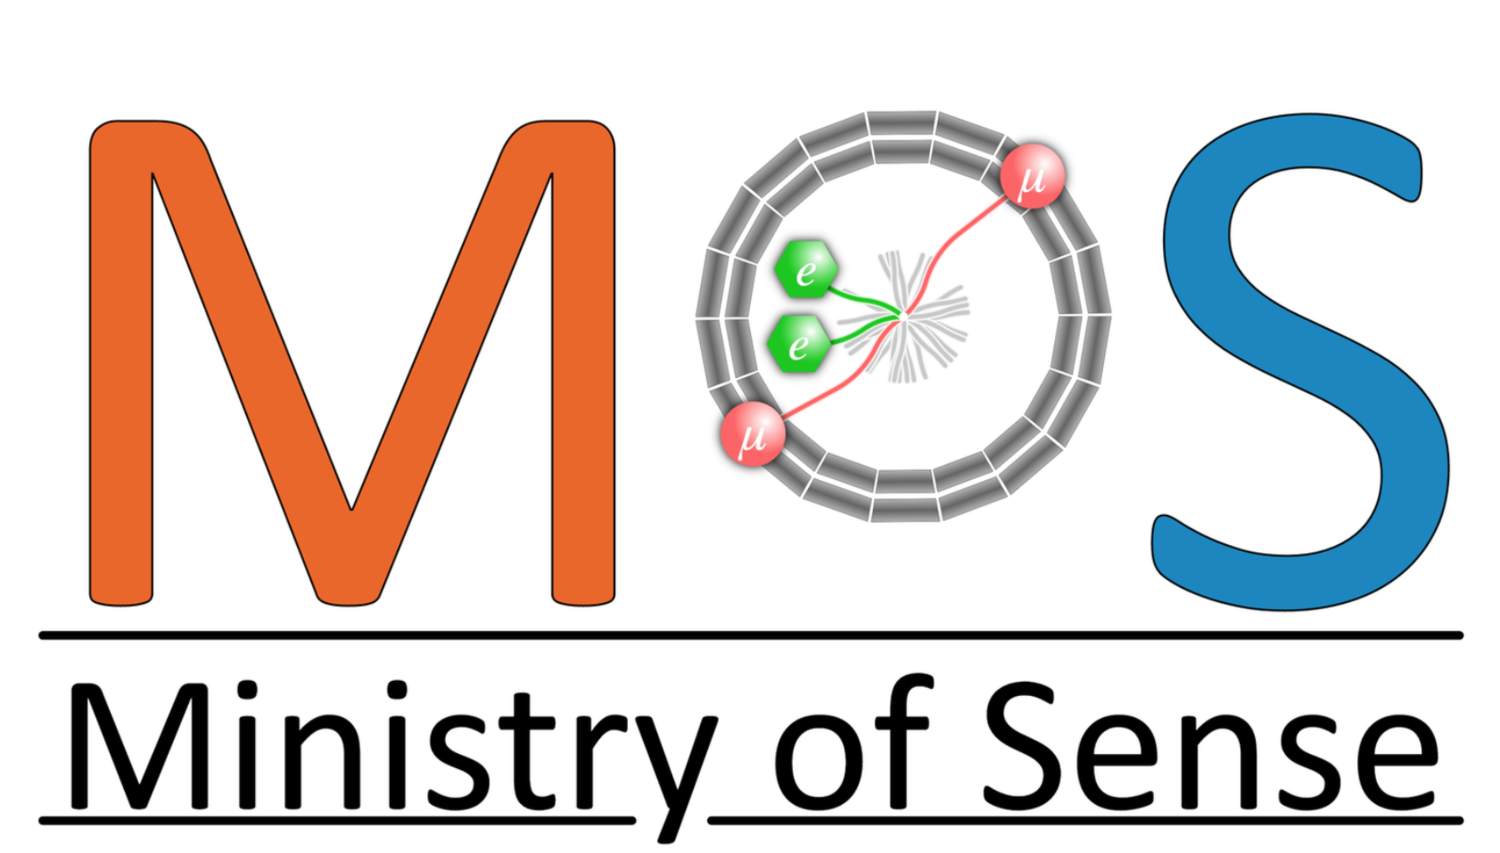 The Ministry of Sense